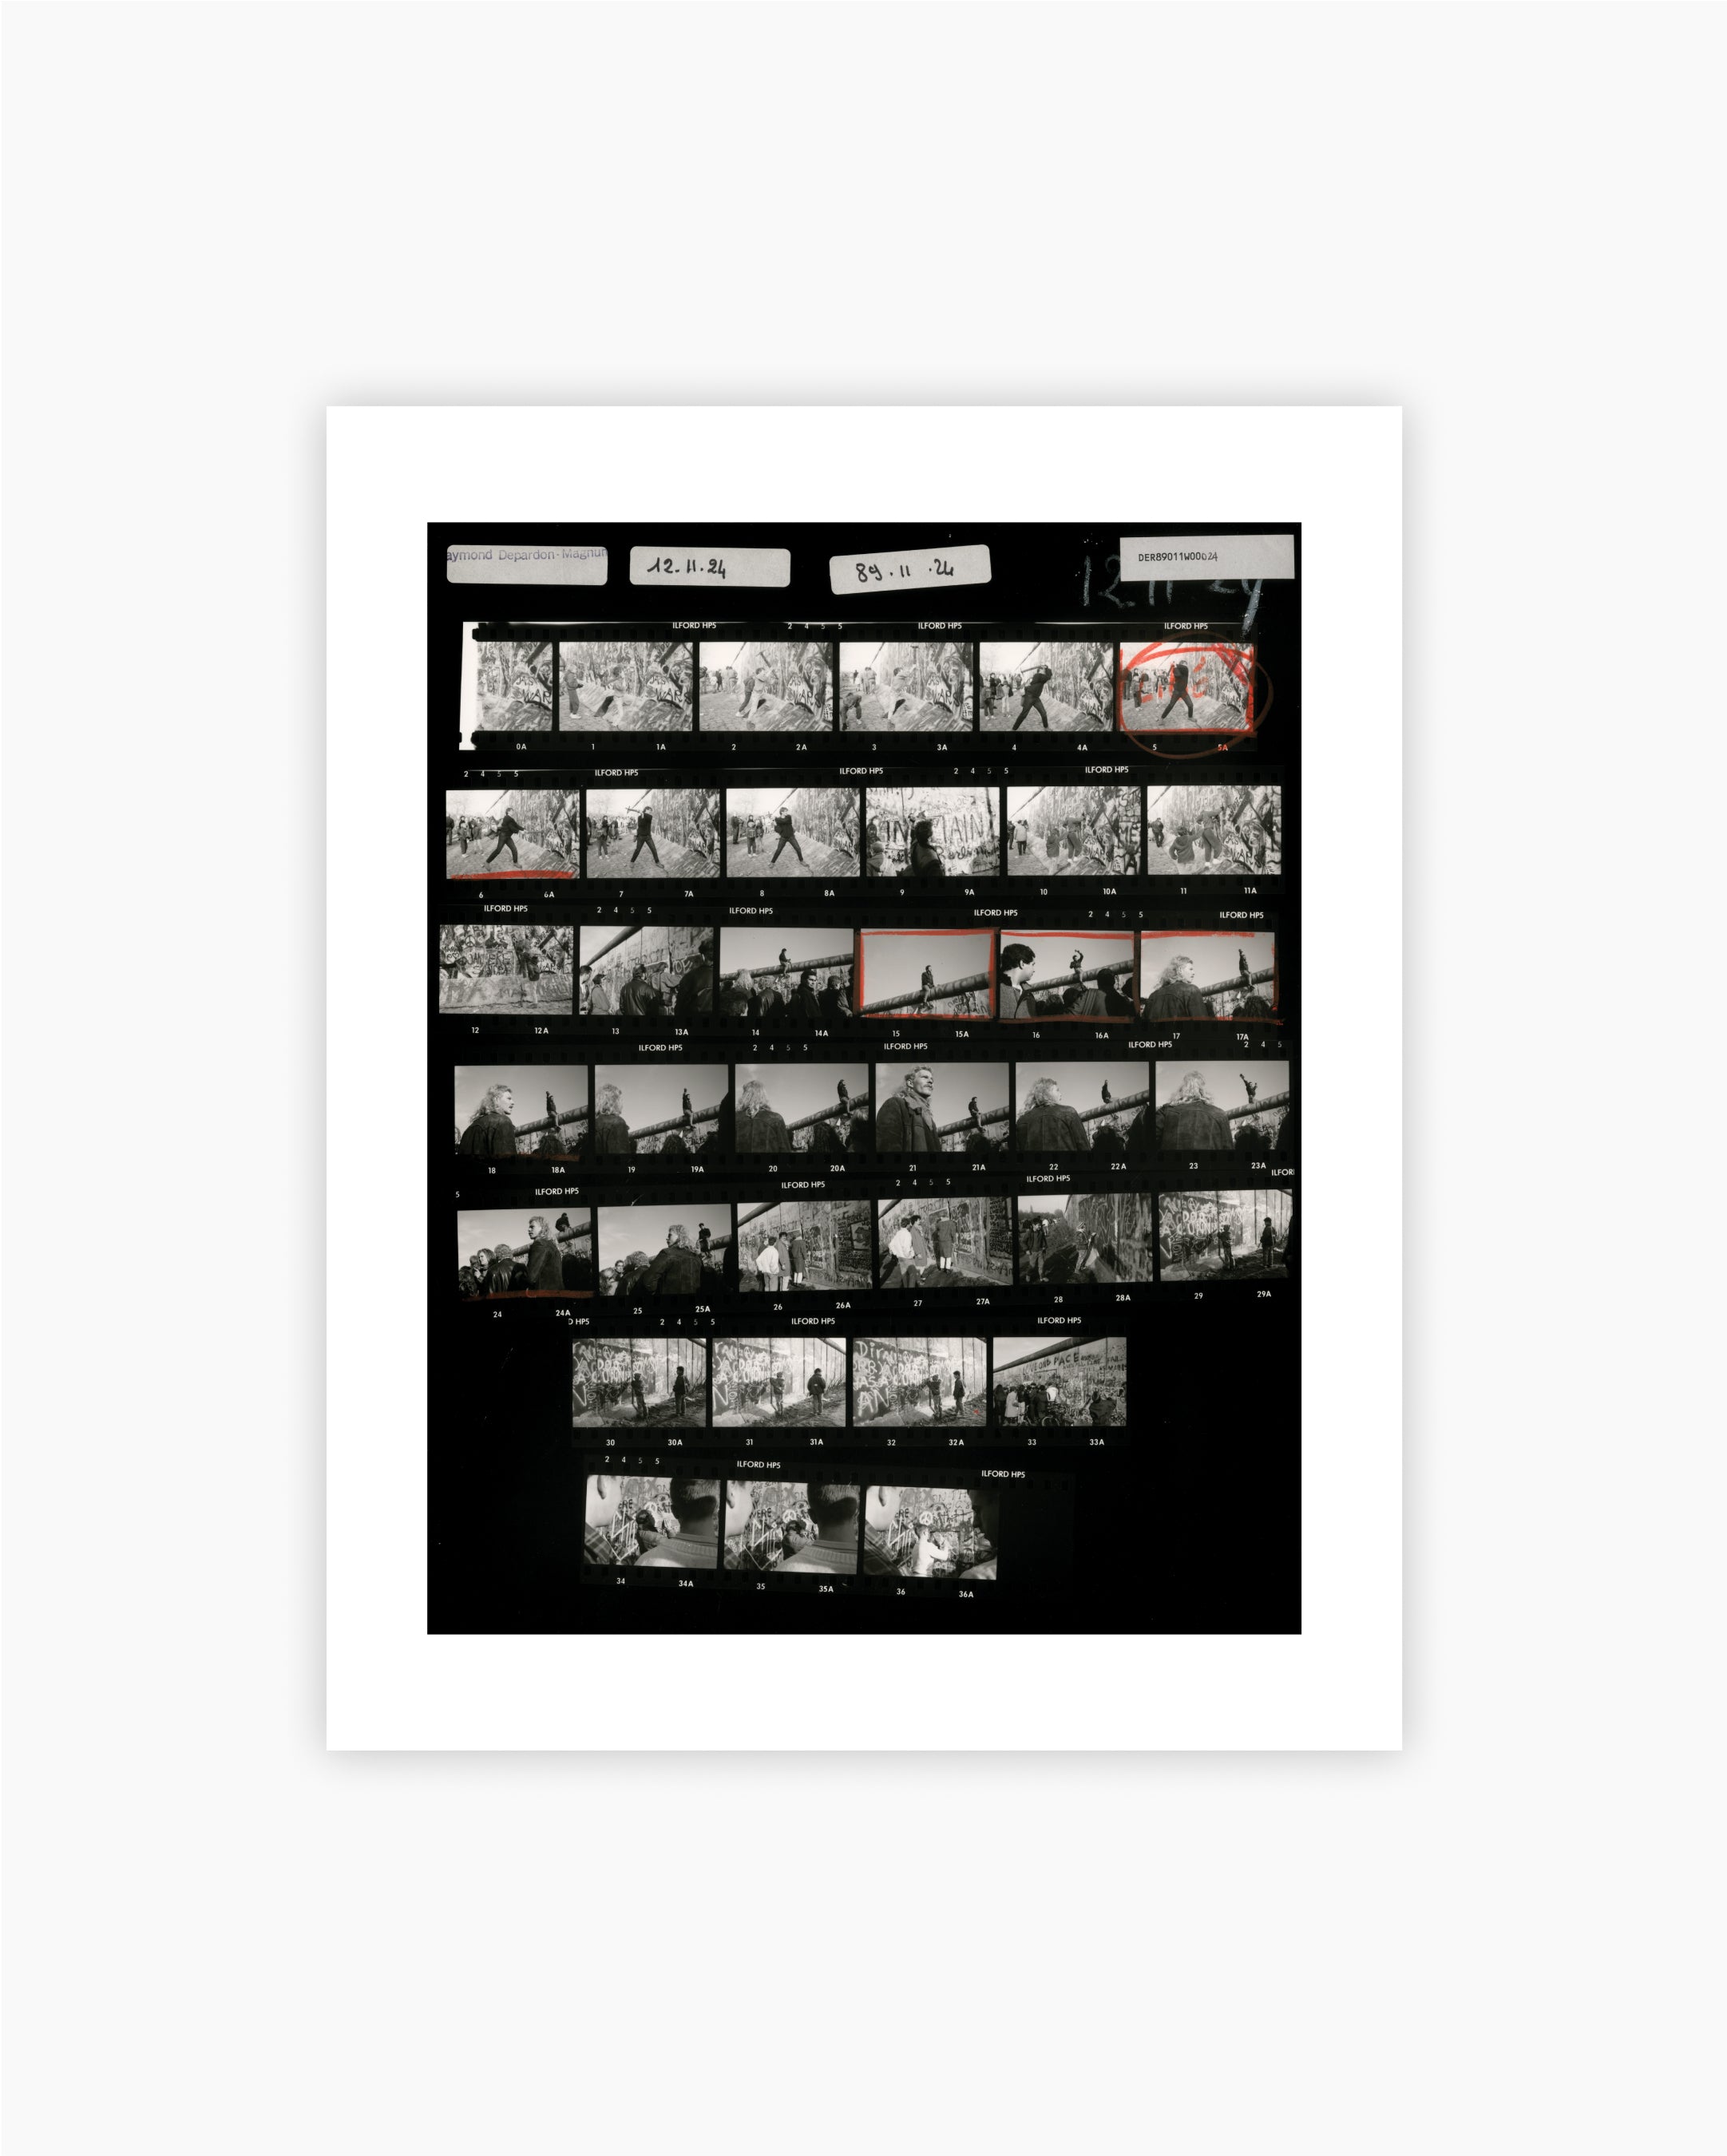 Contact Sheet Print: The Fall of the Berlin Wall. Germany, 1989.